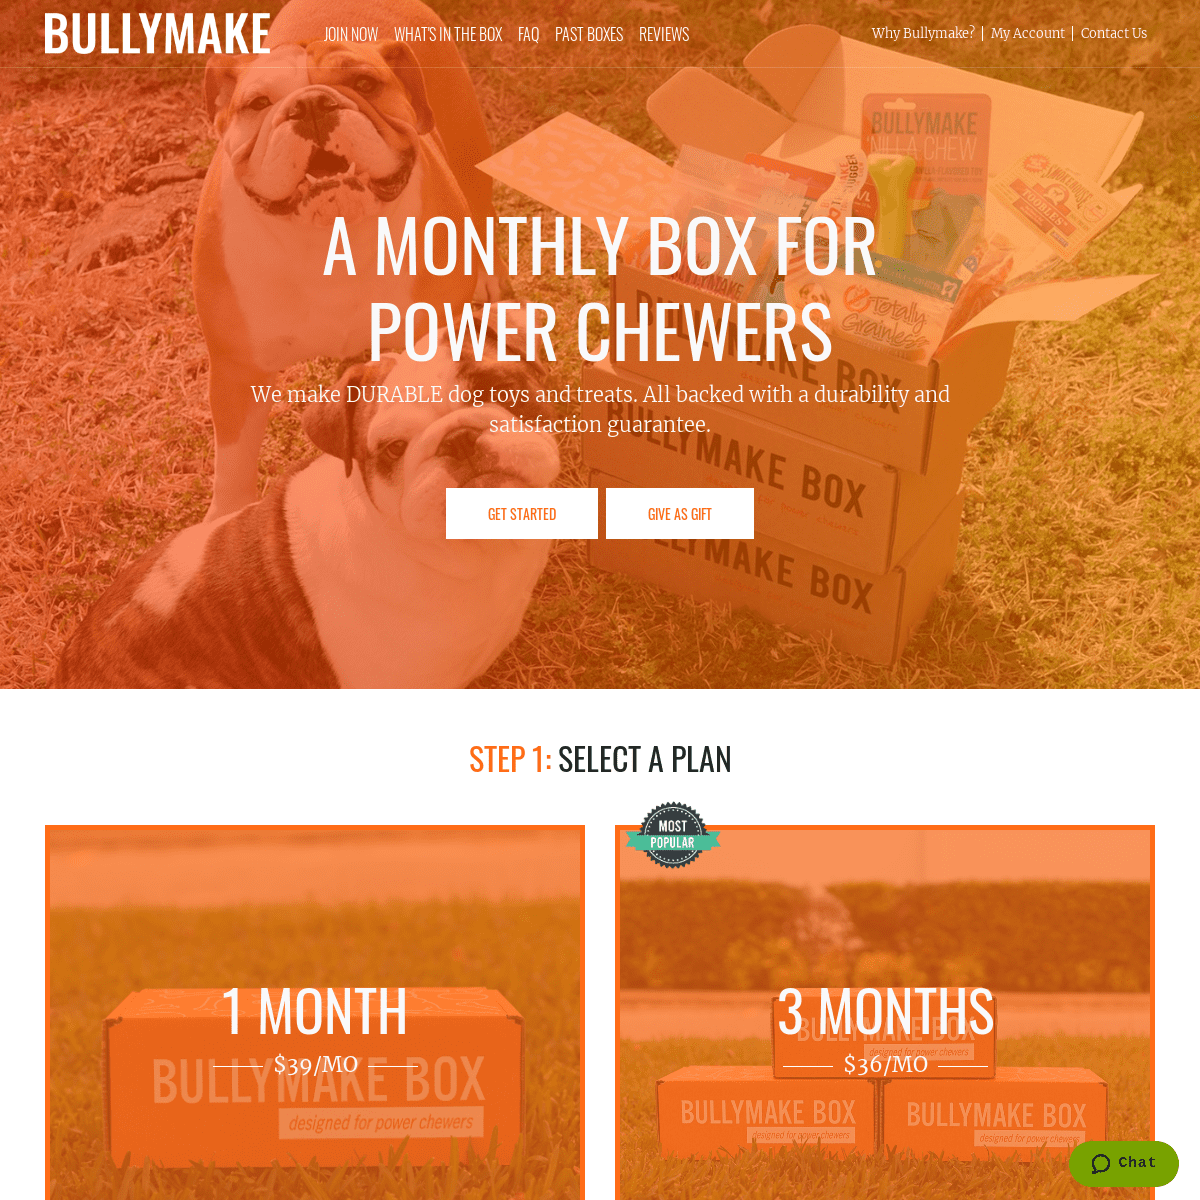 A complete backup of bullymake.com